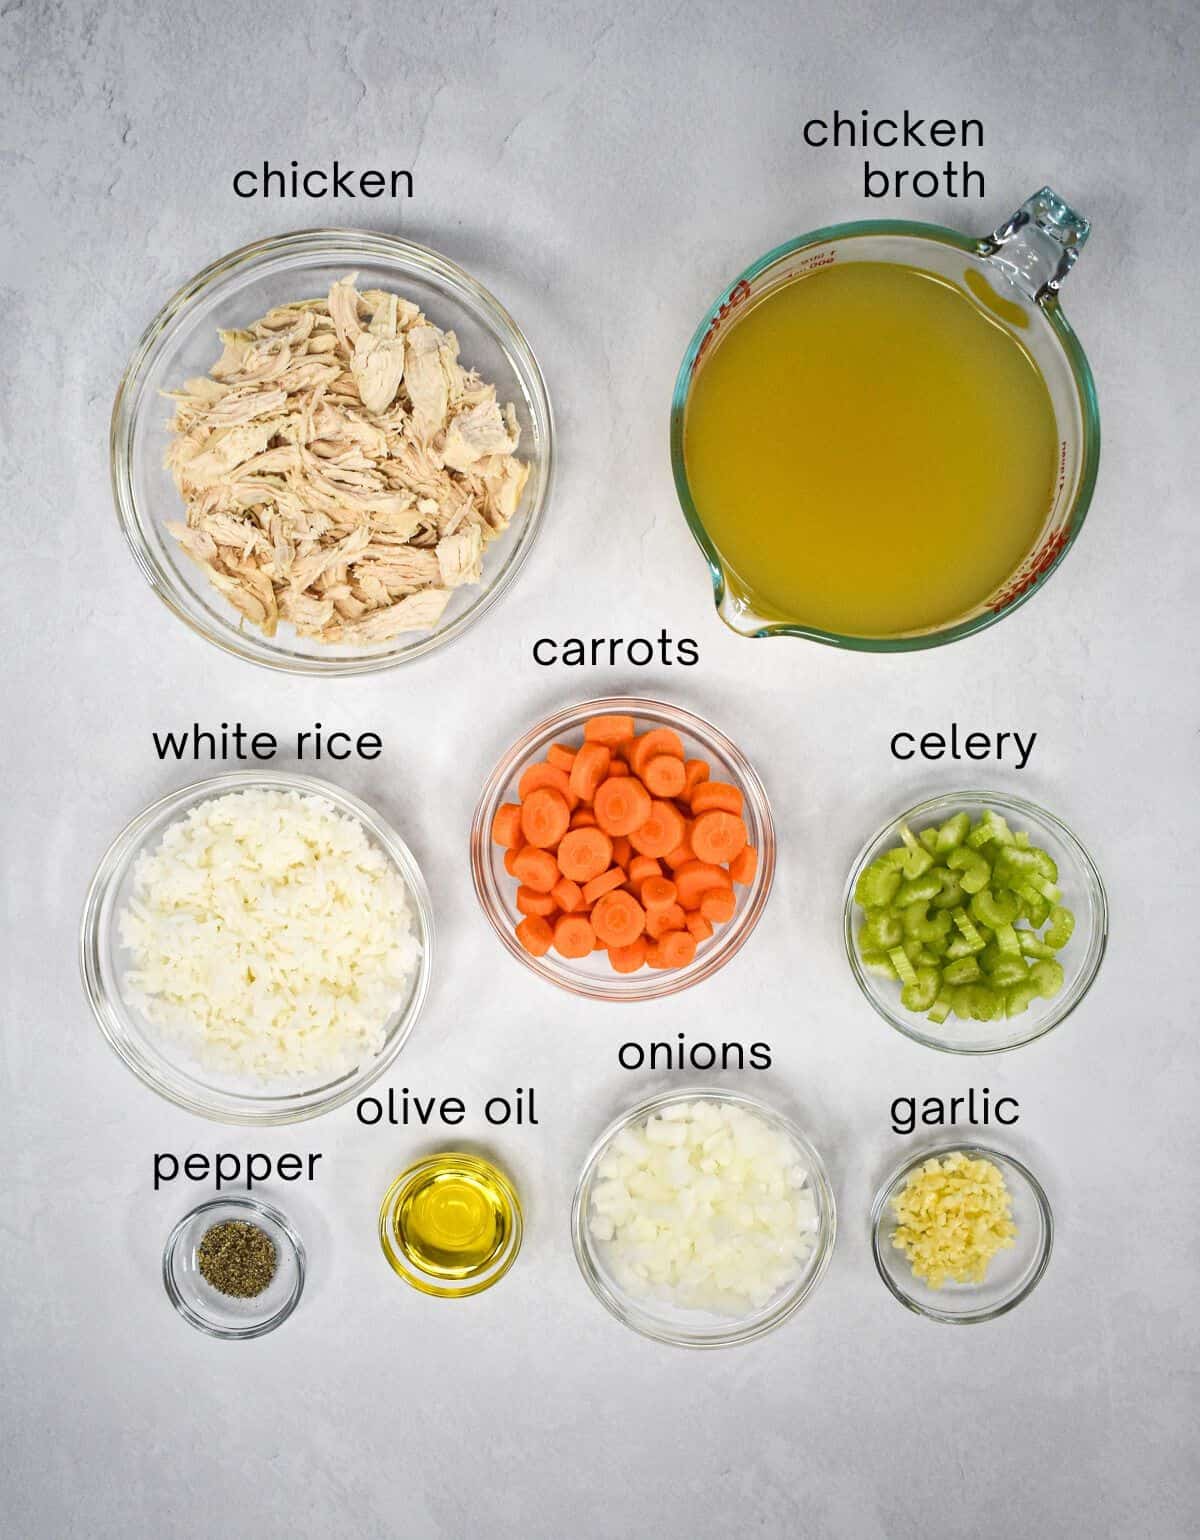 The ingredients for the soup prepped and arranged in glass bowls on a white table with each labeled in small black letters.